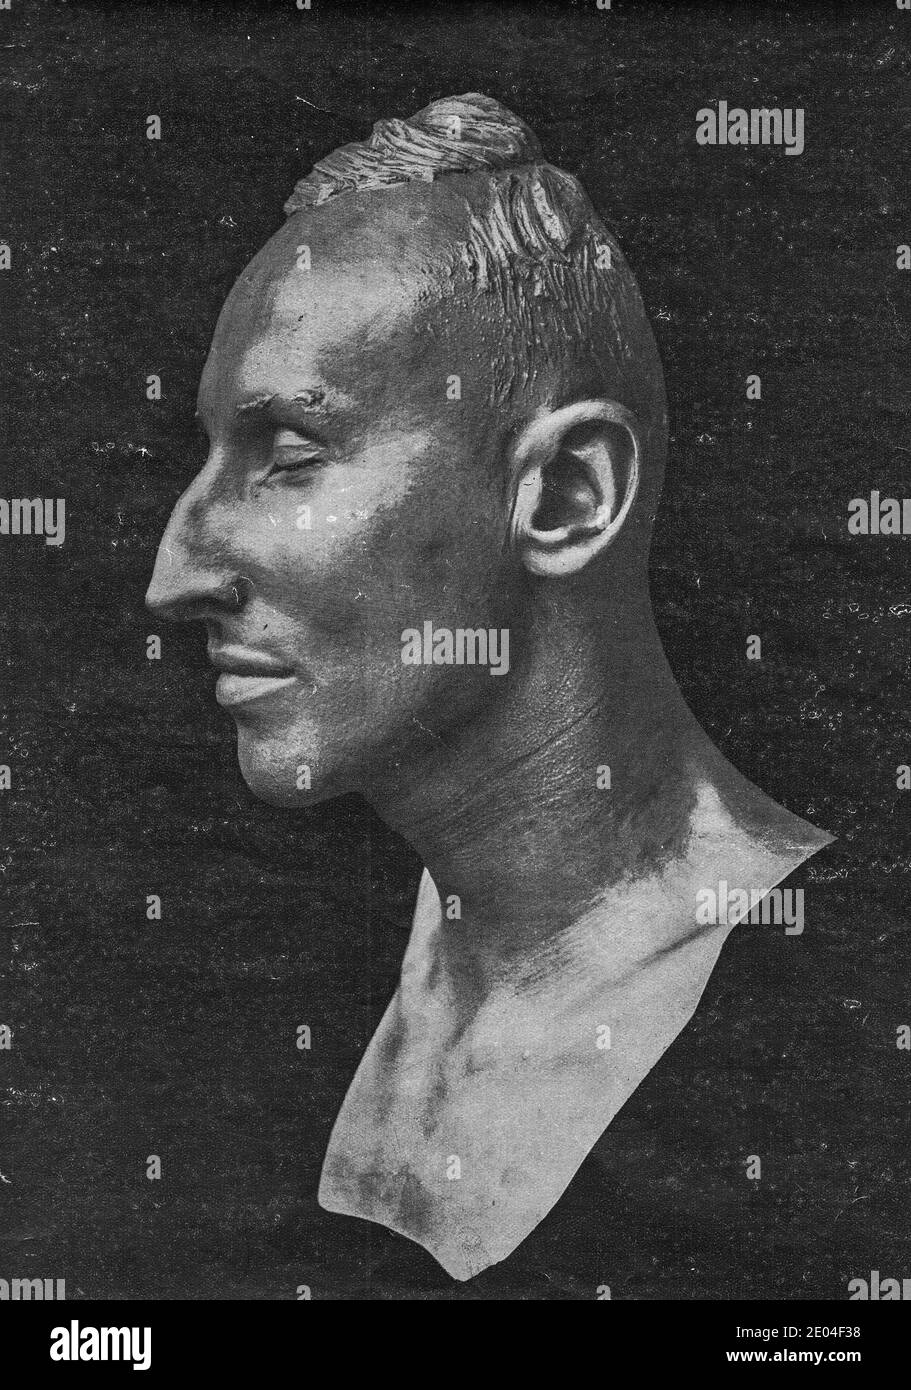 PRAGUE, PROTECTORATE OF BOHEMIA AND MORAVIA - 1942: Death mask of Reinhard Heydrich, made by Prof. Franz Rotter (sculptor). Stock Photo